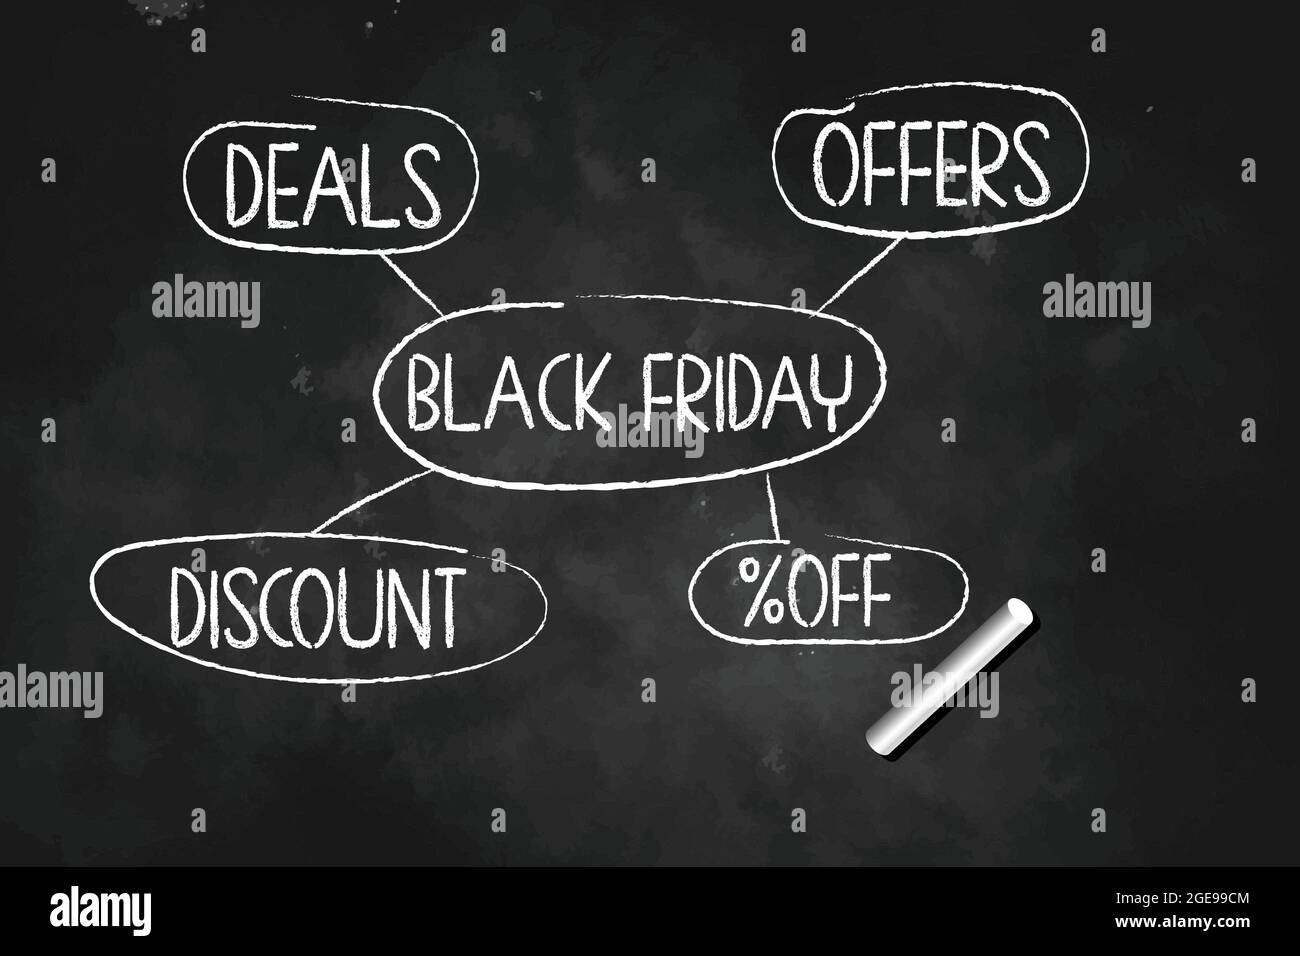 Black Friday   offers deals discount off chart drawn with chalk on black board vector illustration Stock Vector